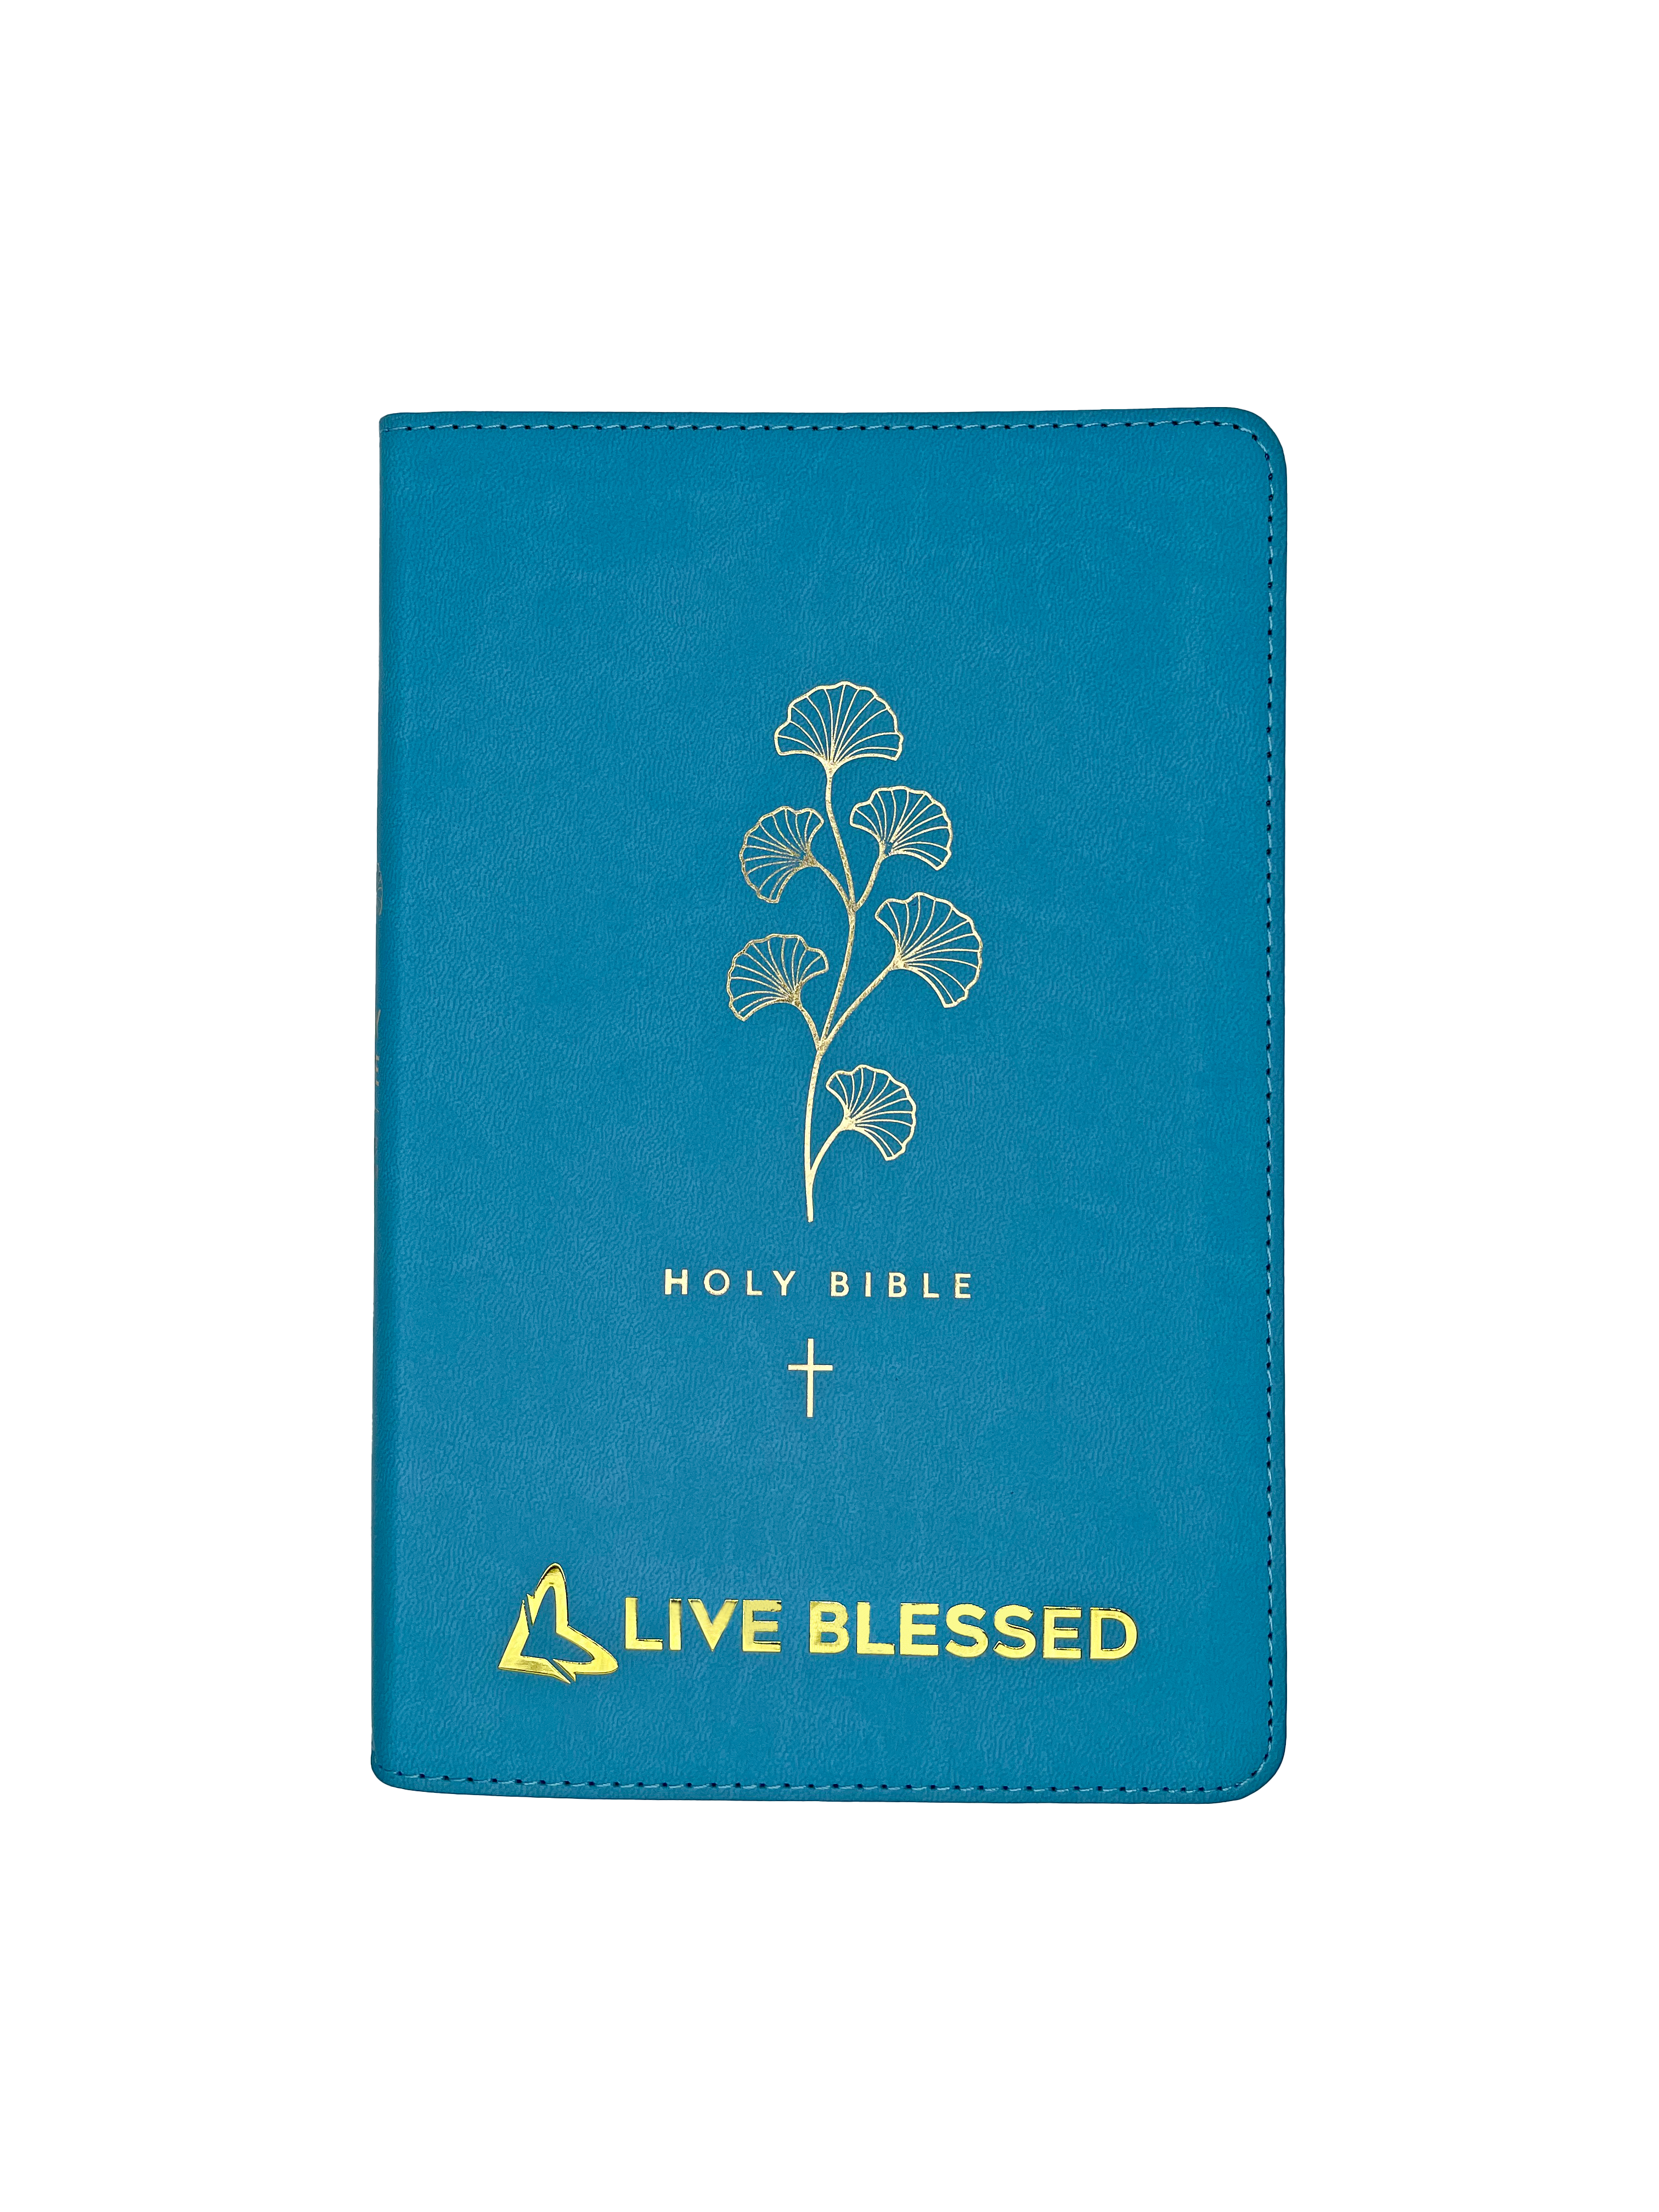 Limited Edition Live Blessed Bible NLT